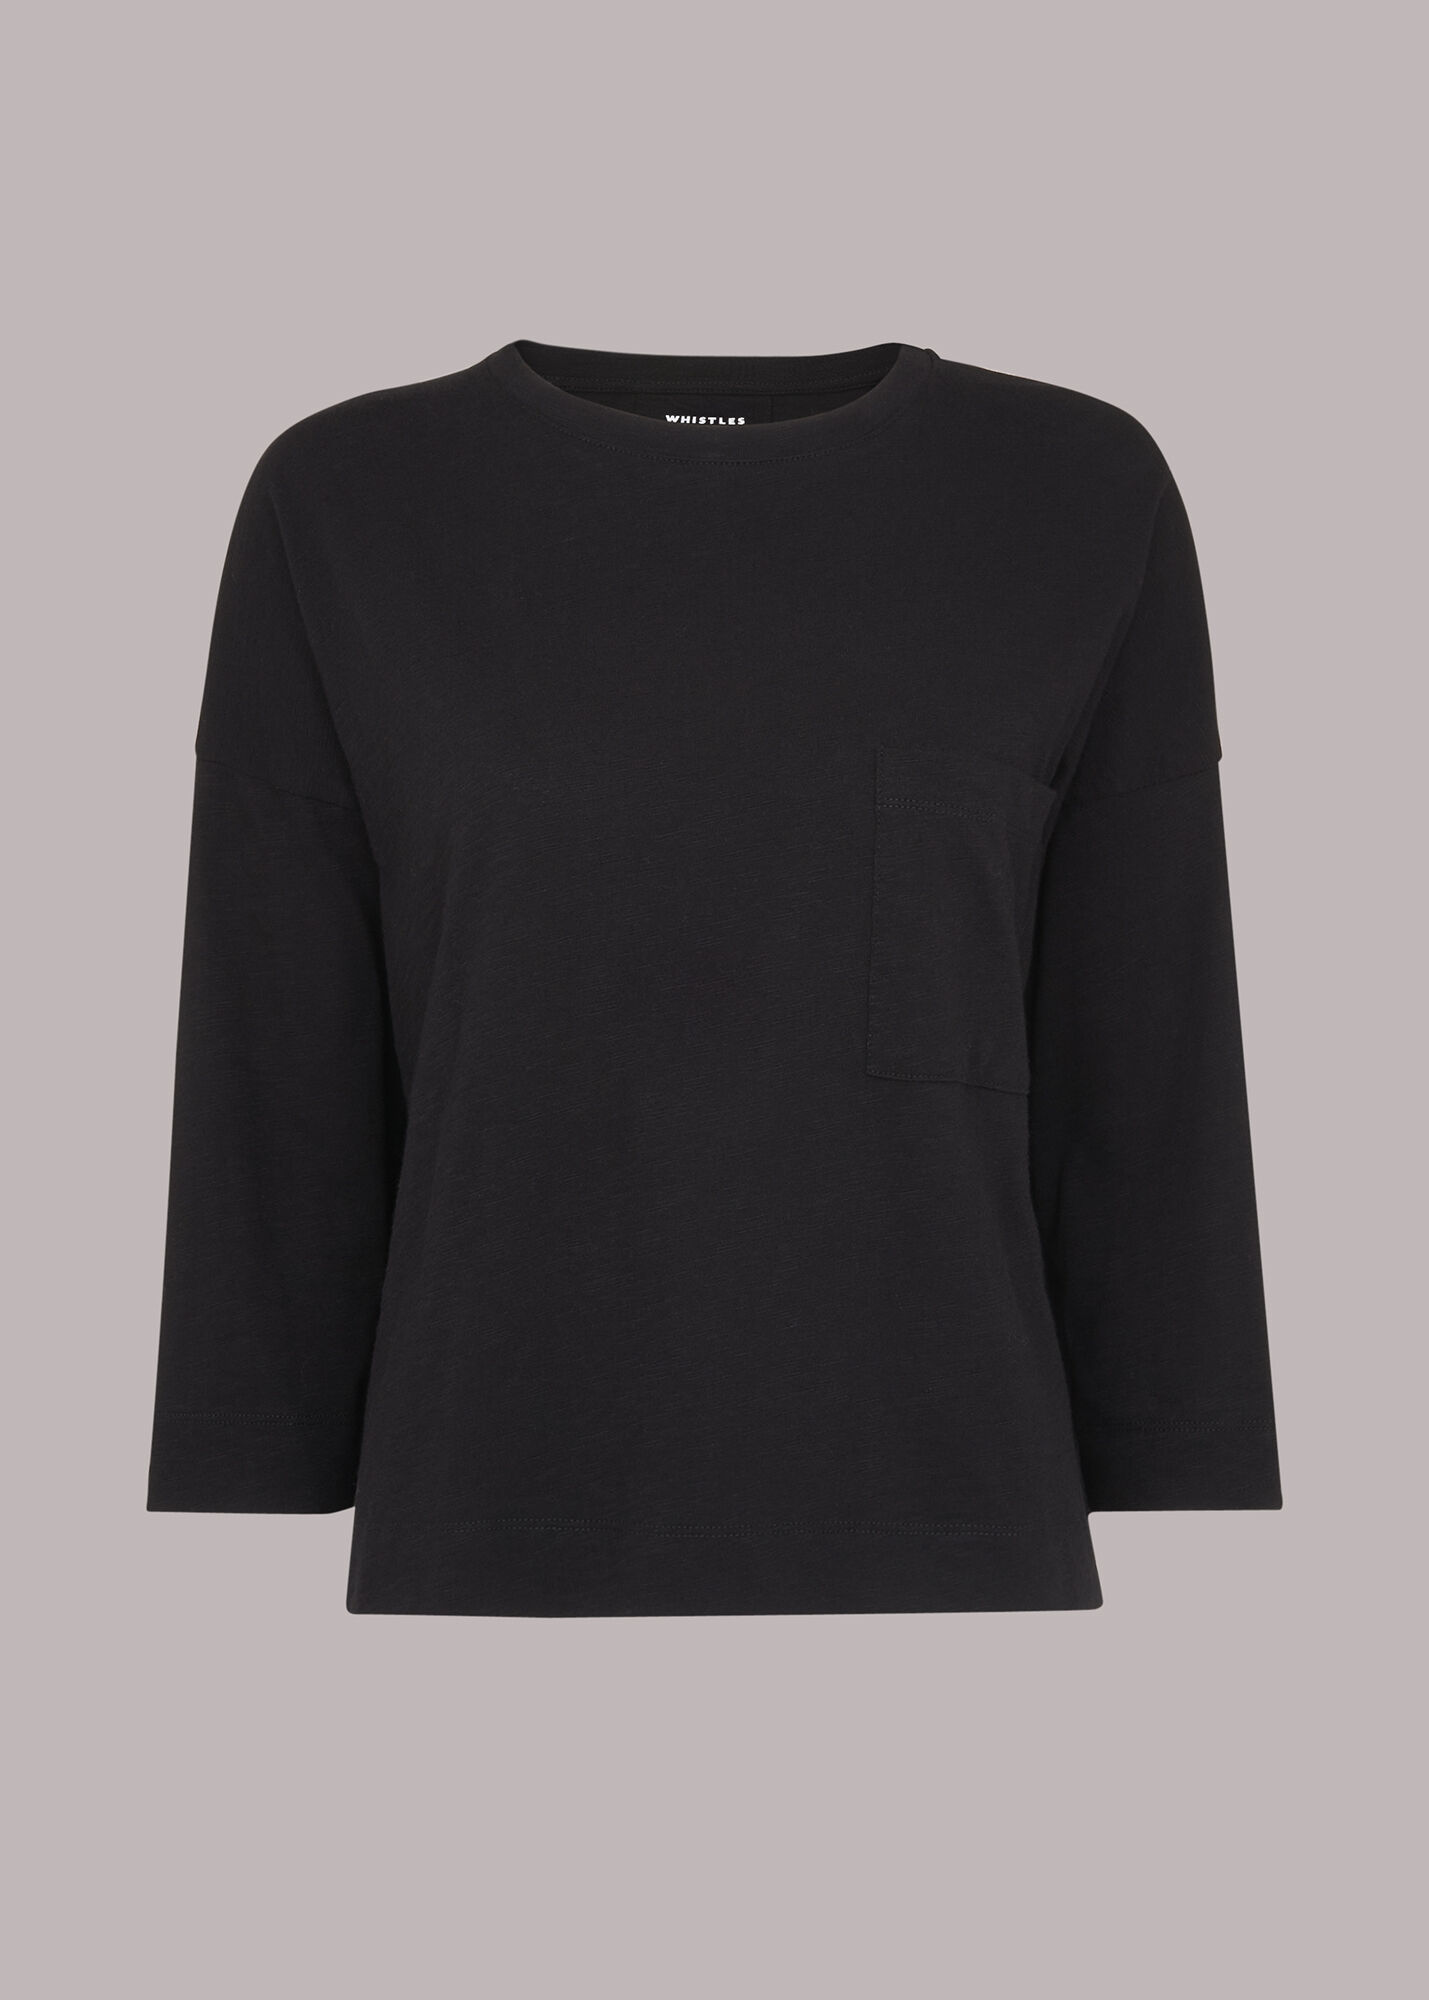 Black Long-Sleeve Top with Pocket | 100% Cotton | Whistles